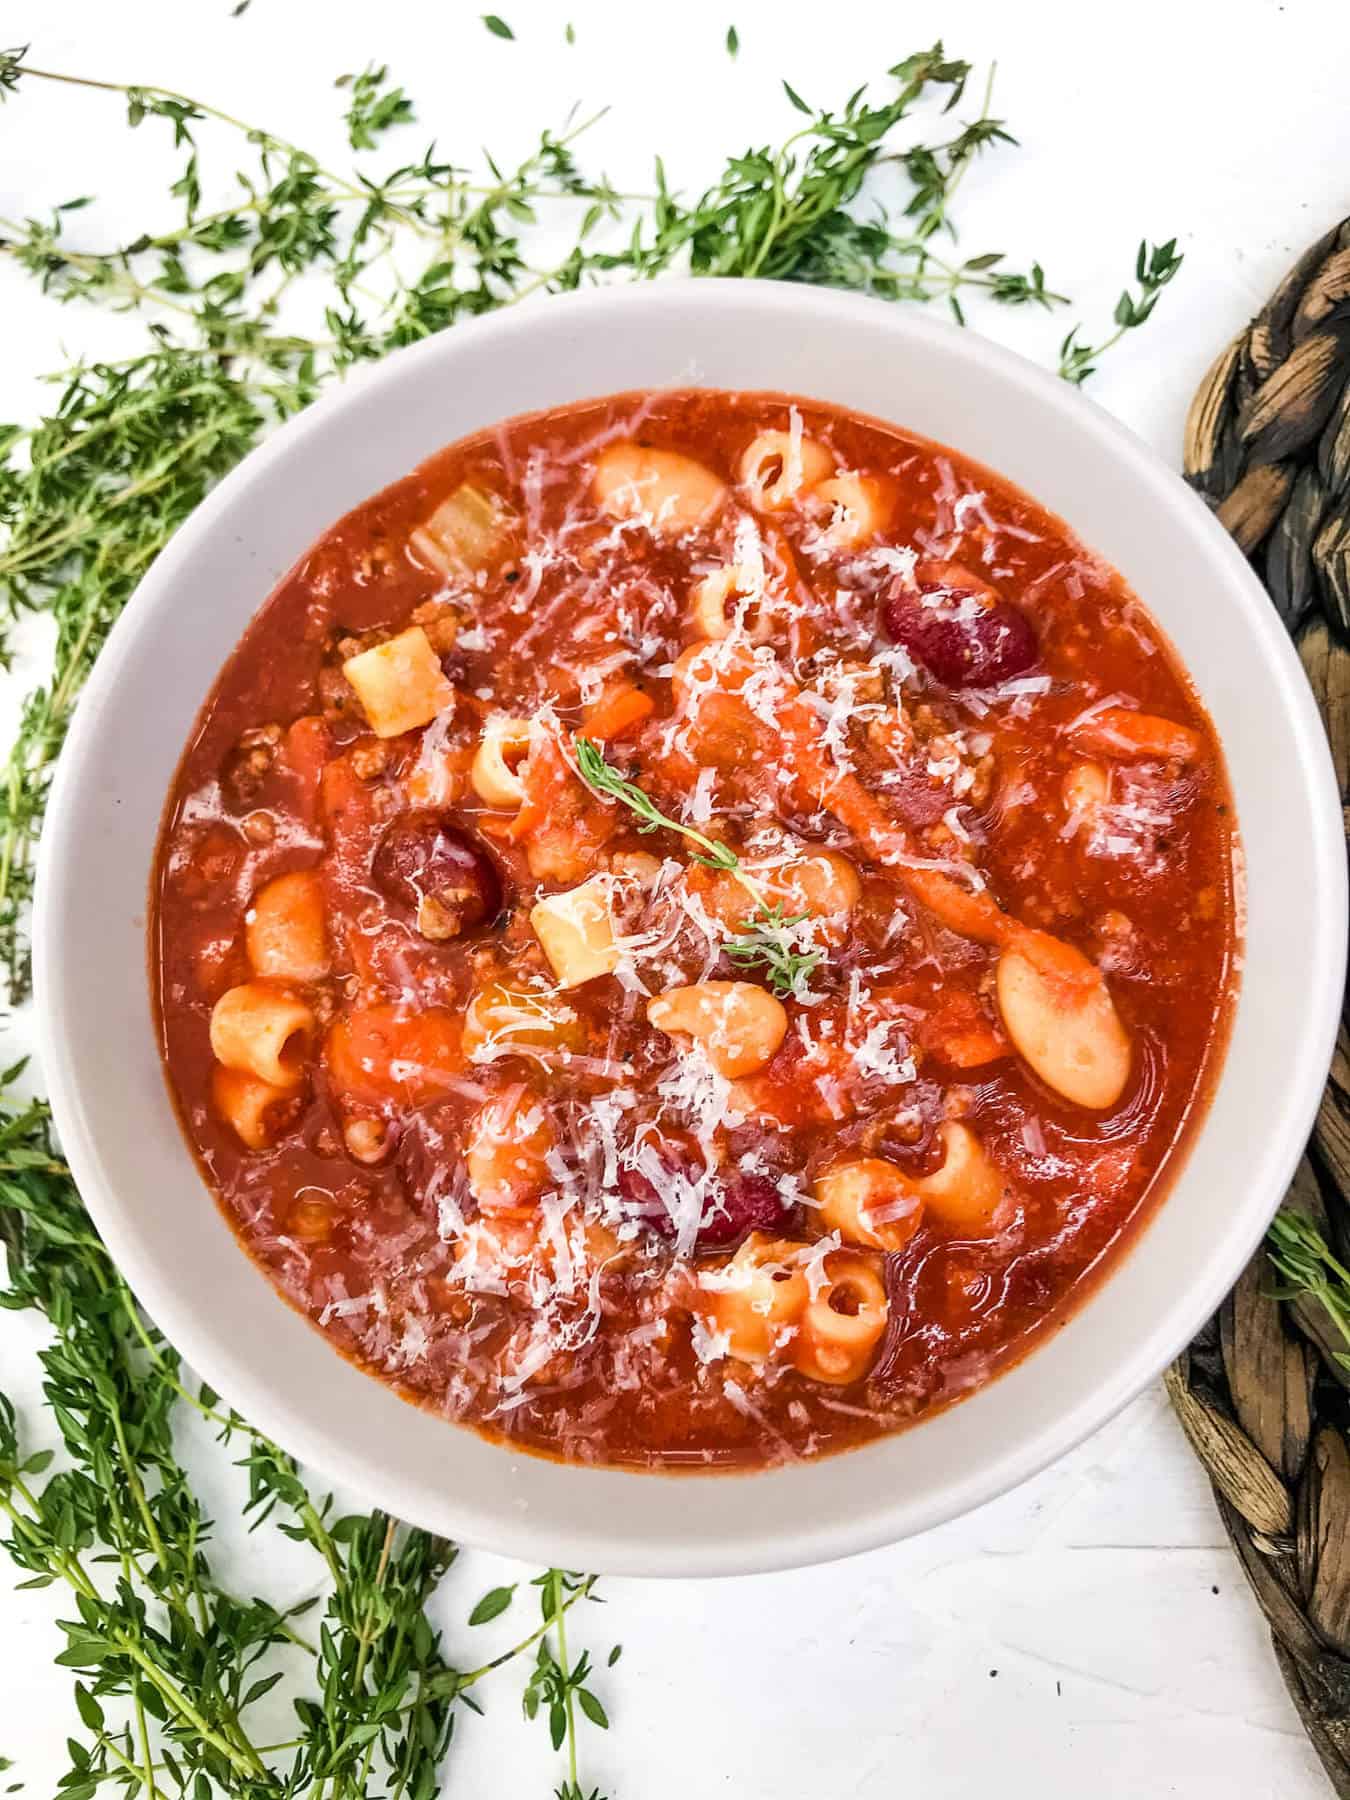 Top view of a bowl of Copycat Olive Garden Pasta Fagioli Soup